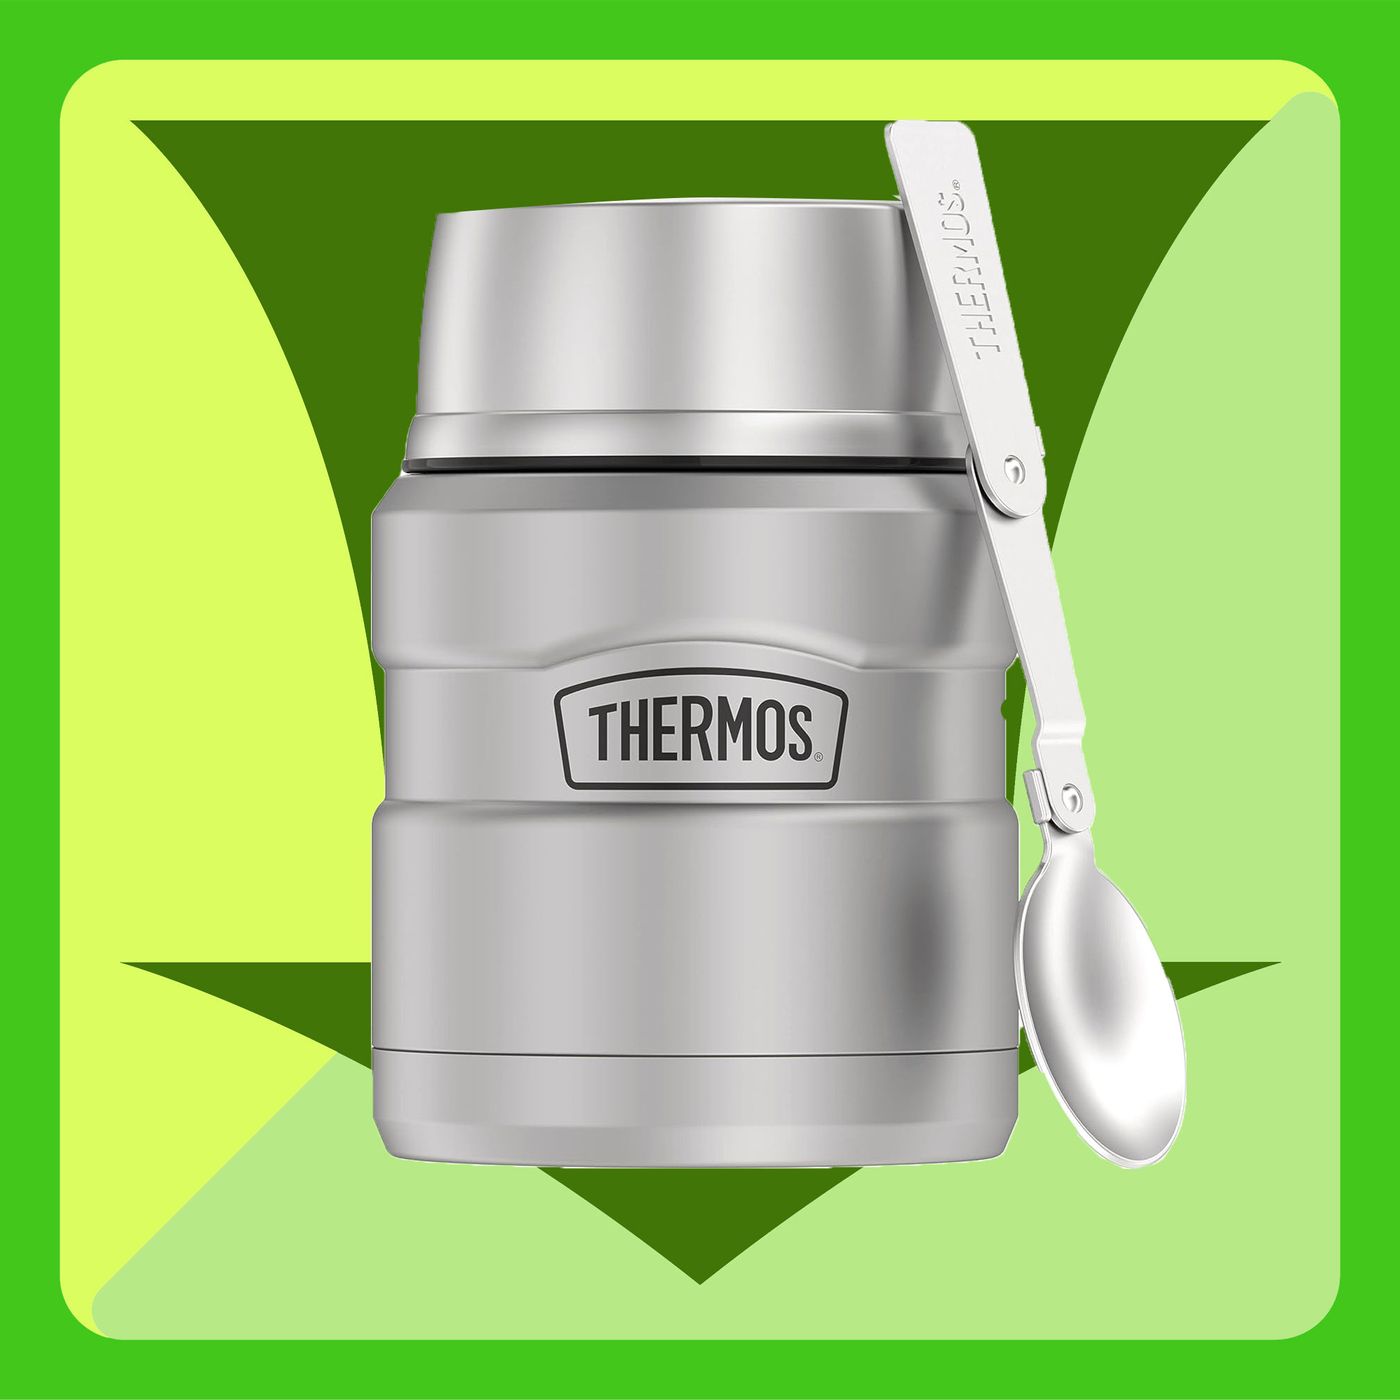 10 of Our Favorite Thermoses to Keep Soup HOT